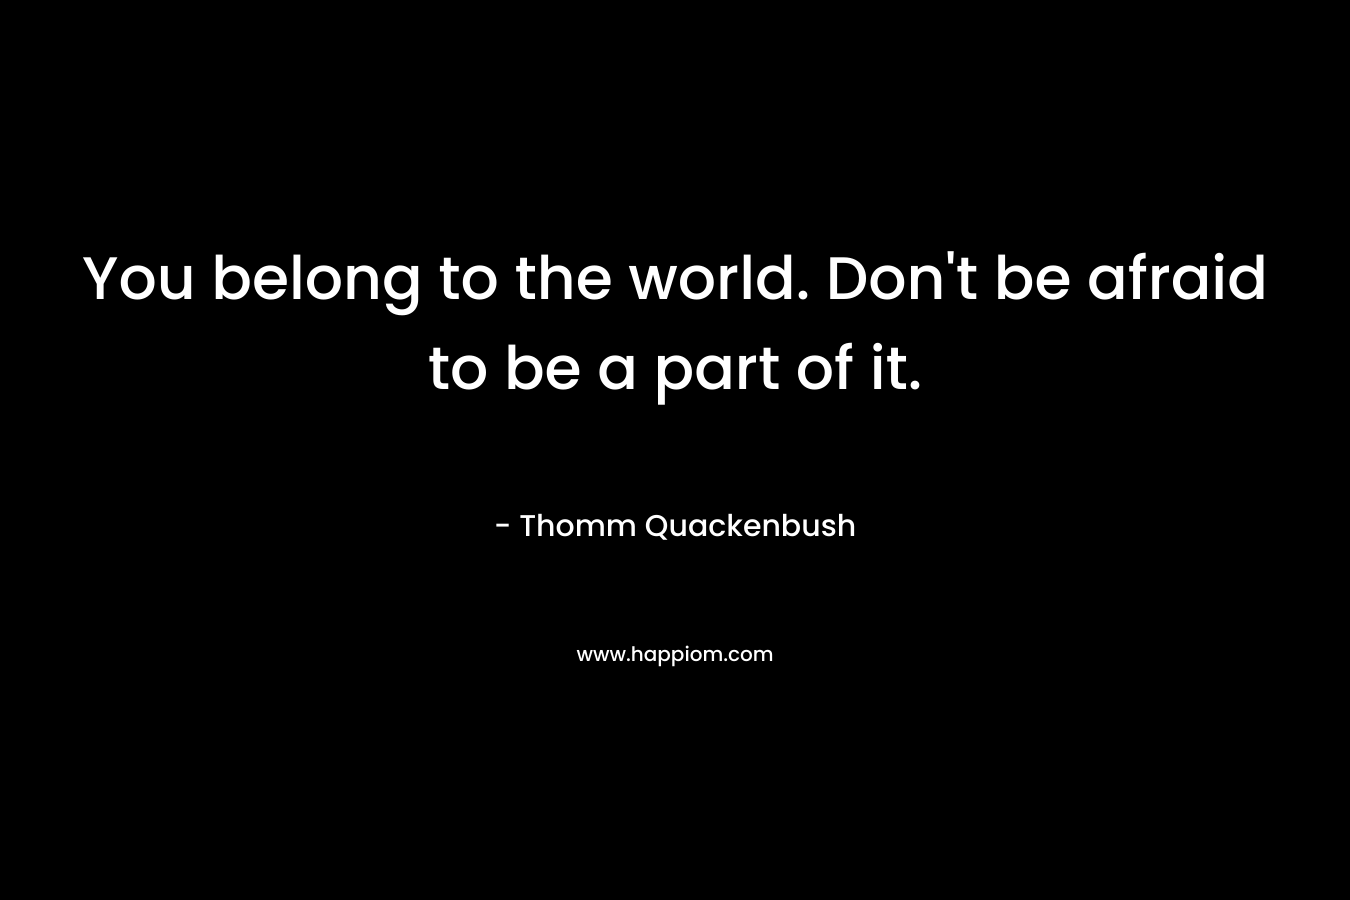 You belong to the world. Don't be afraid to be a part of it.